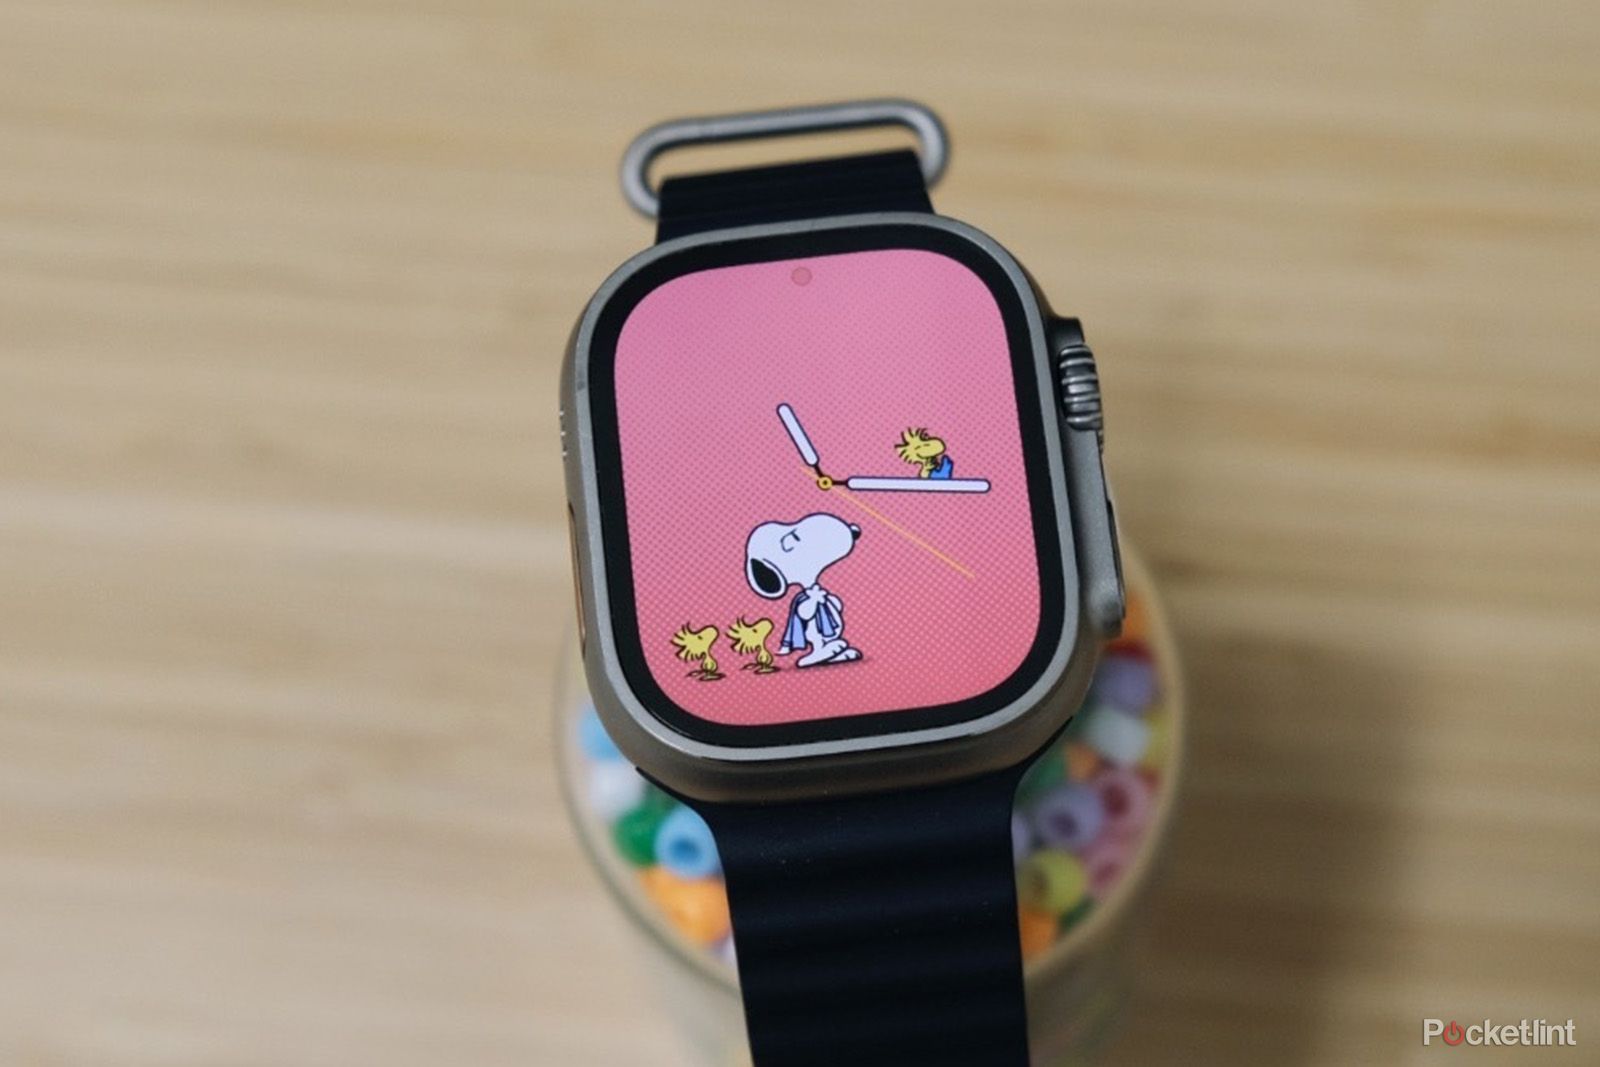 How to get the Snoopy Watch Face on your Apple Watch and what it does